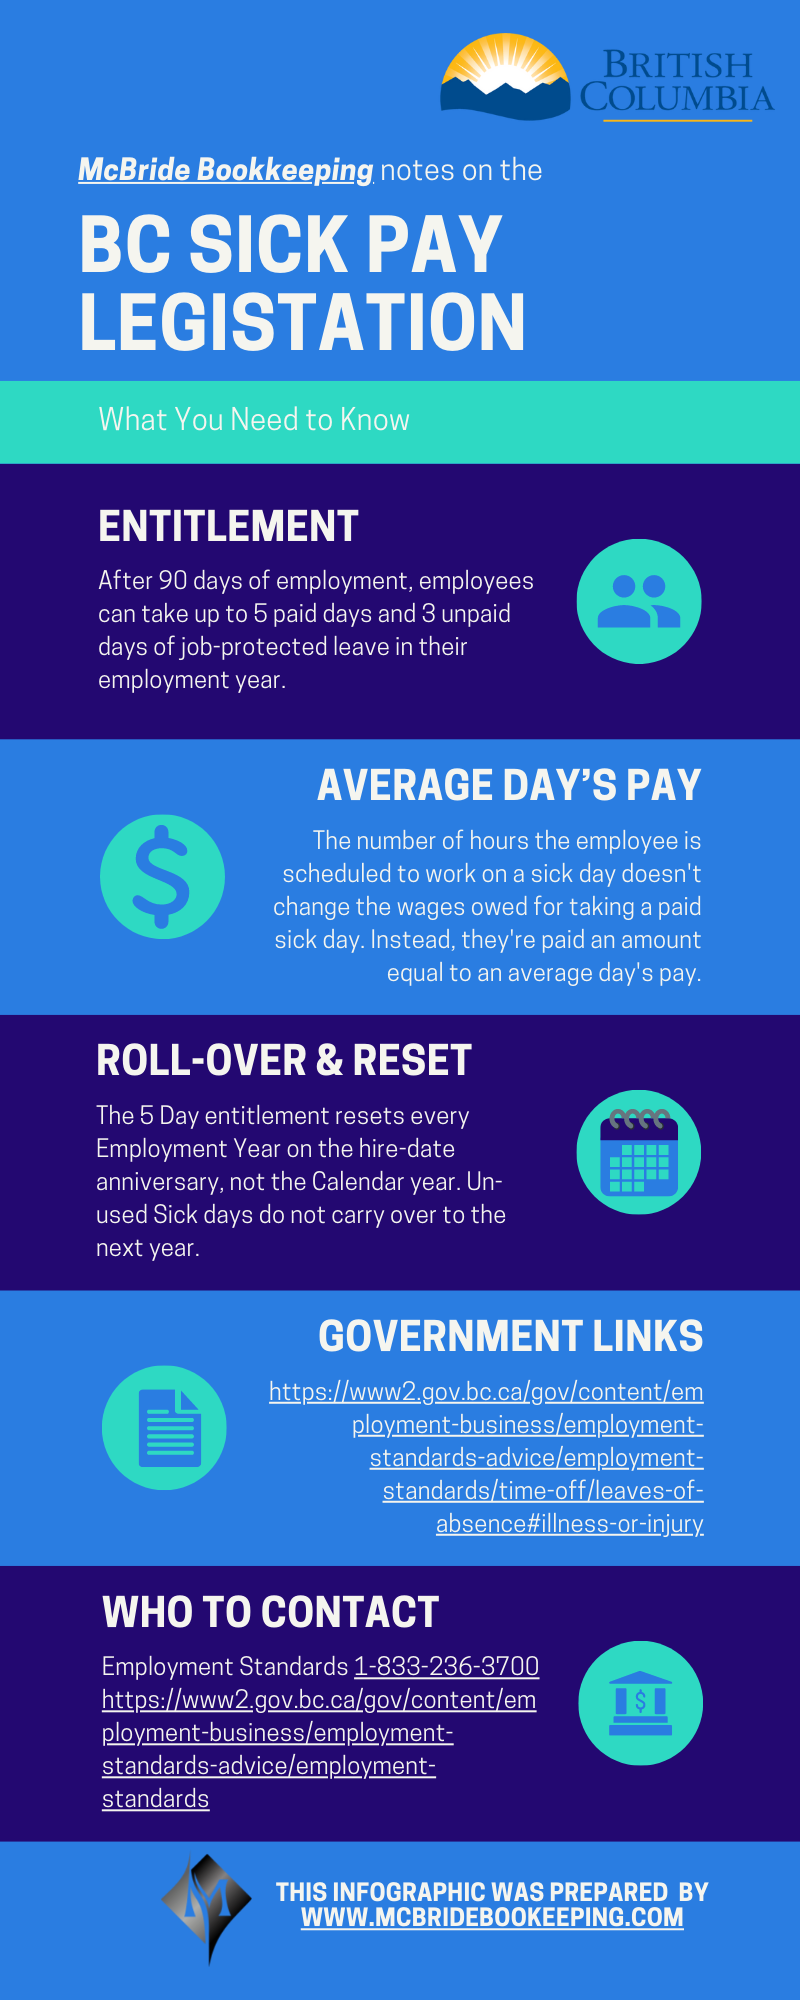 BC Sick Pay Legislation infographic by McBride Bookkeeping